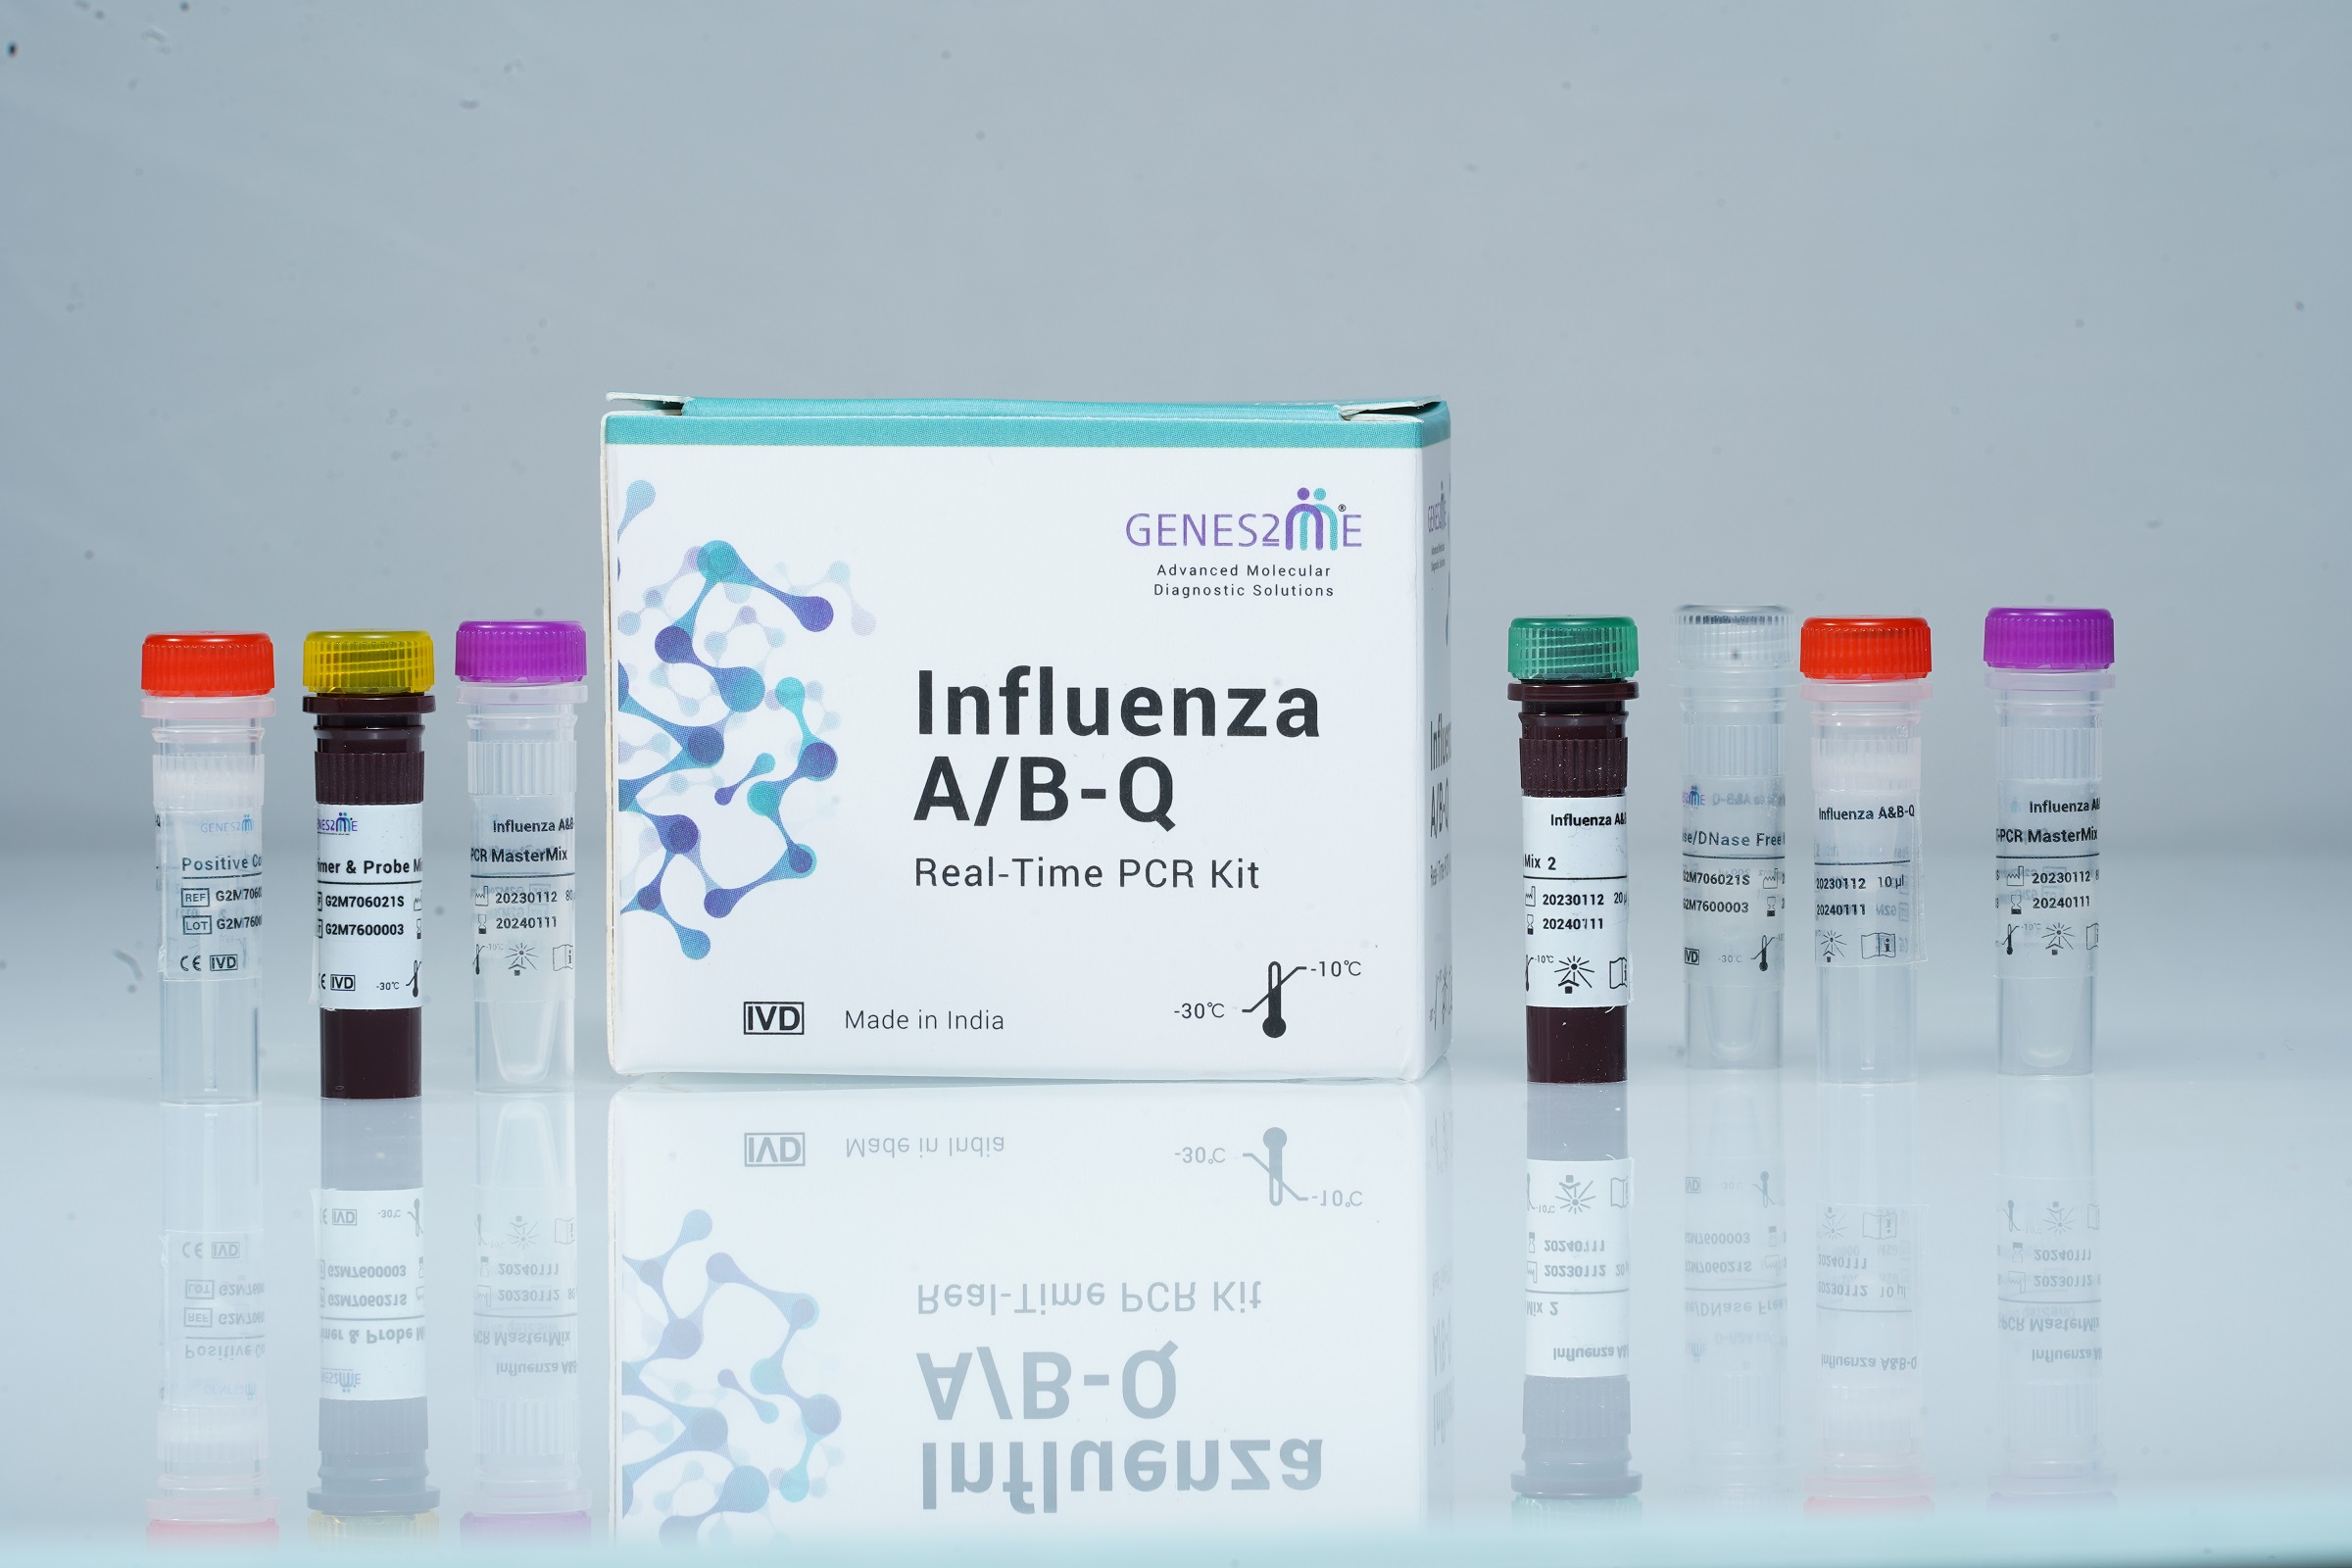 Influenza A and B